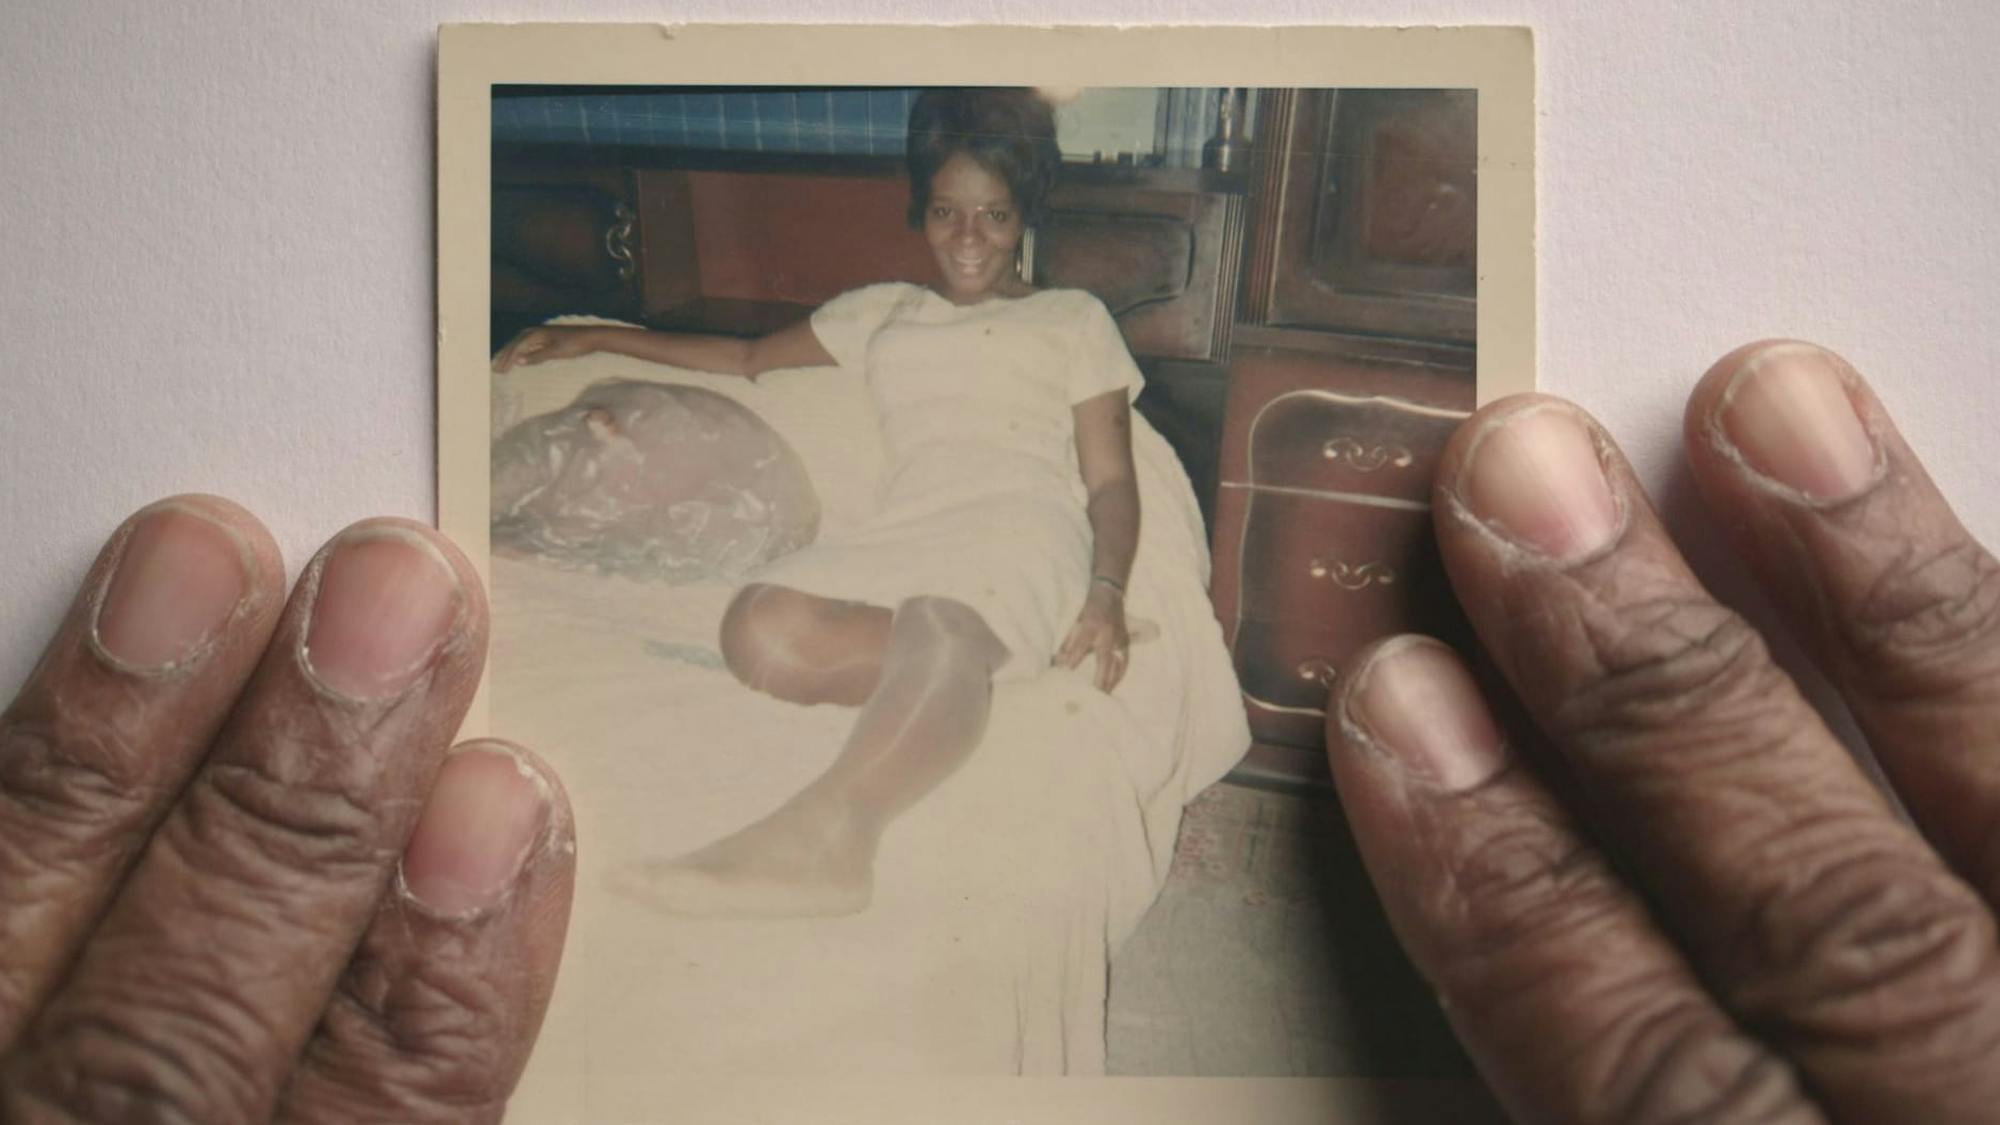 A shot from Strong Island. A pair of hands frame a polaroid of someone lounging on a bed in all white.